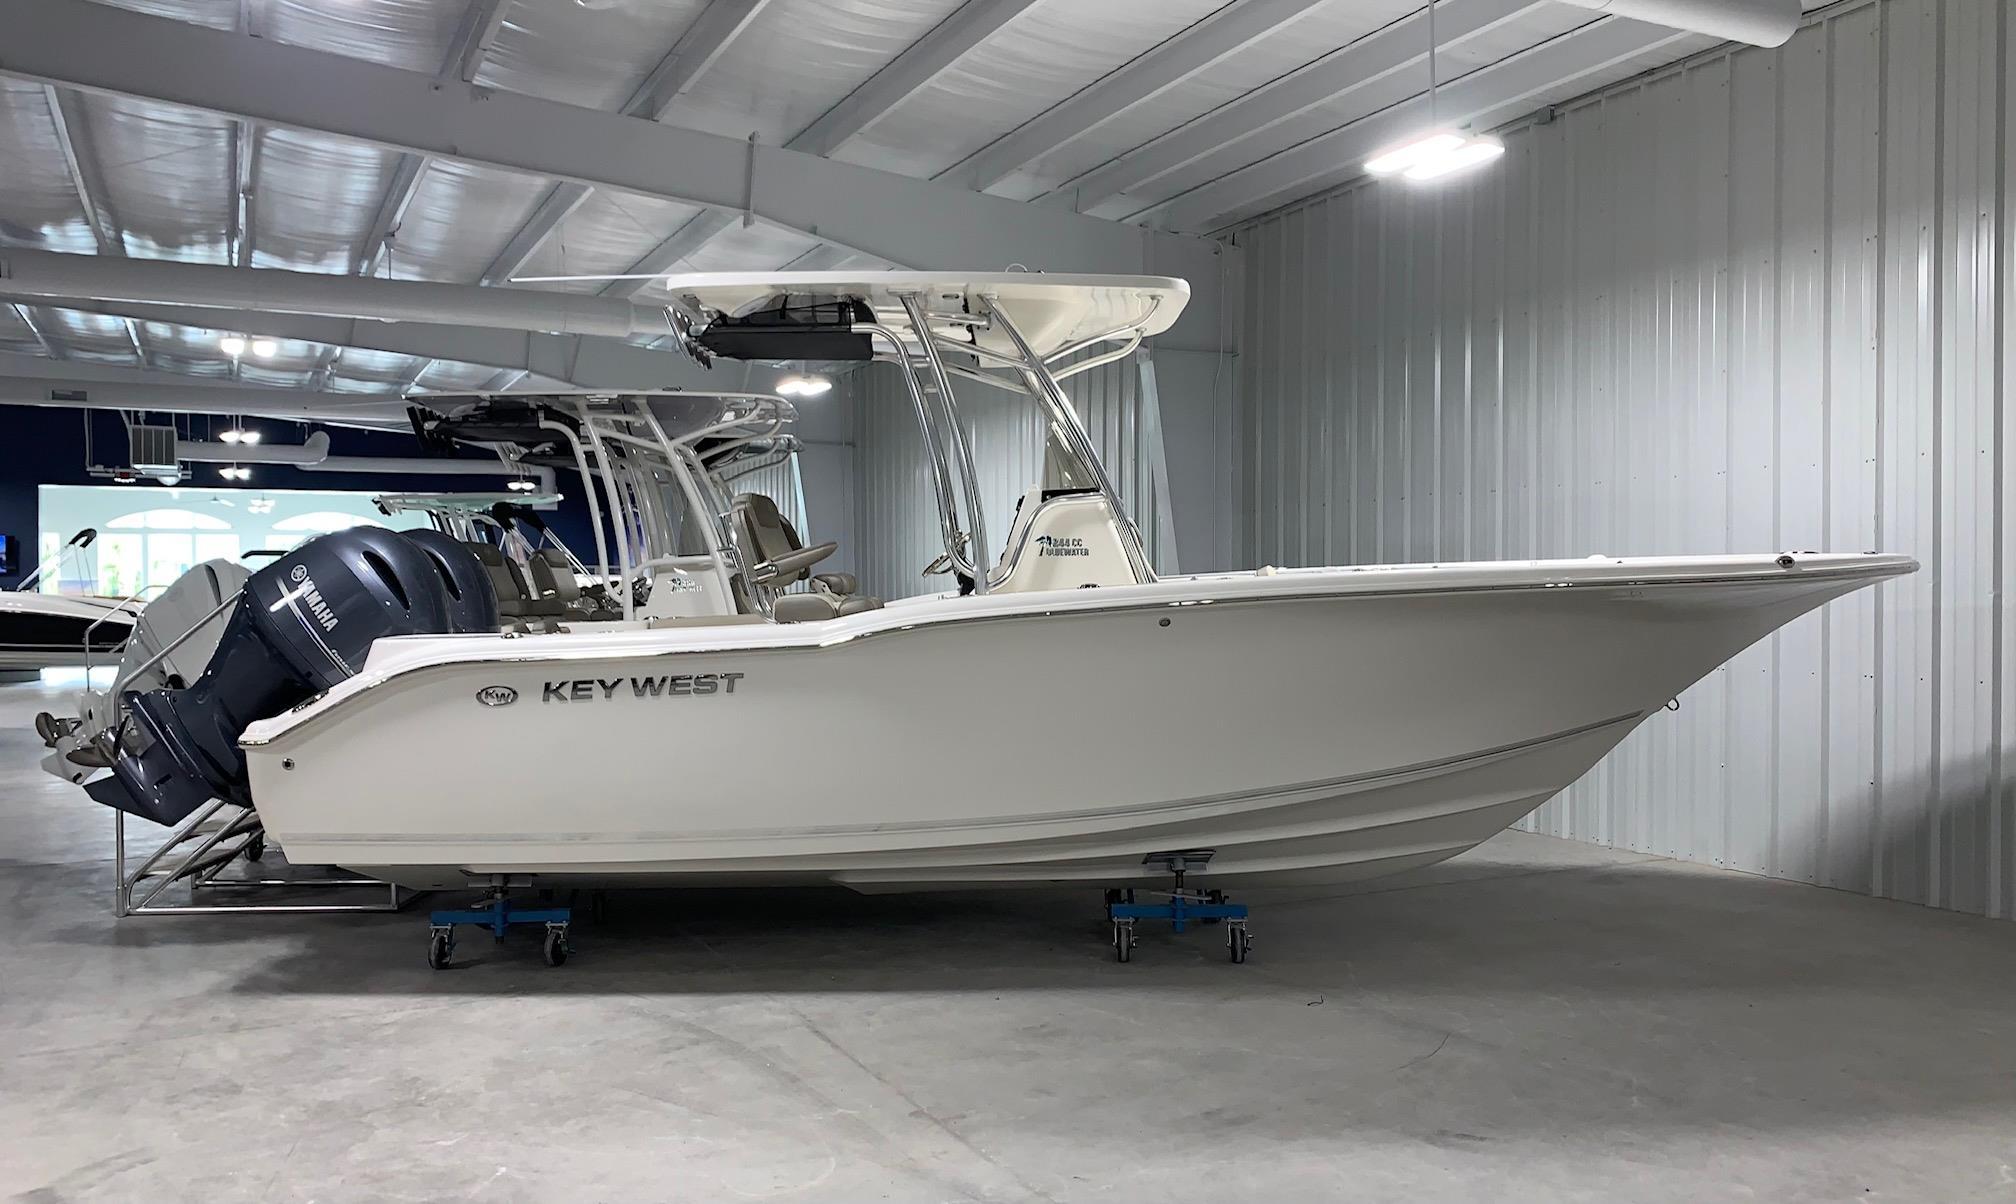 Key West 244 Center Console boats for sale in North Carolina - Boat Trader